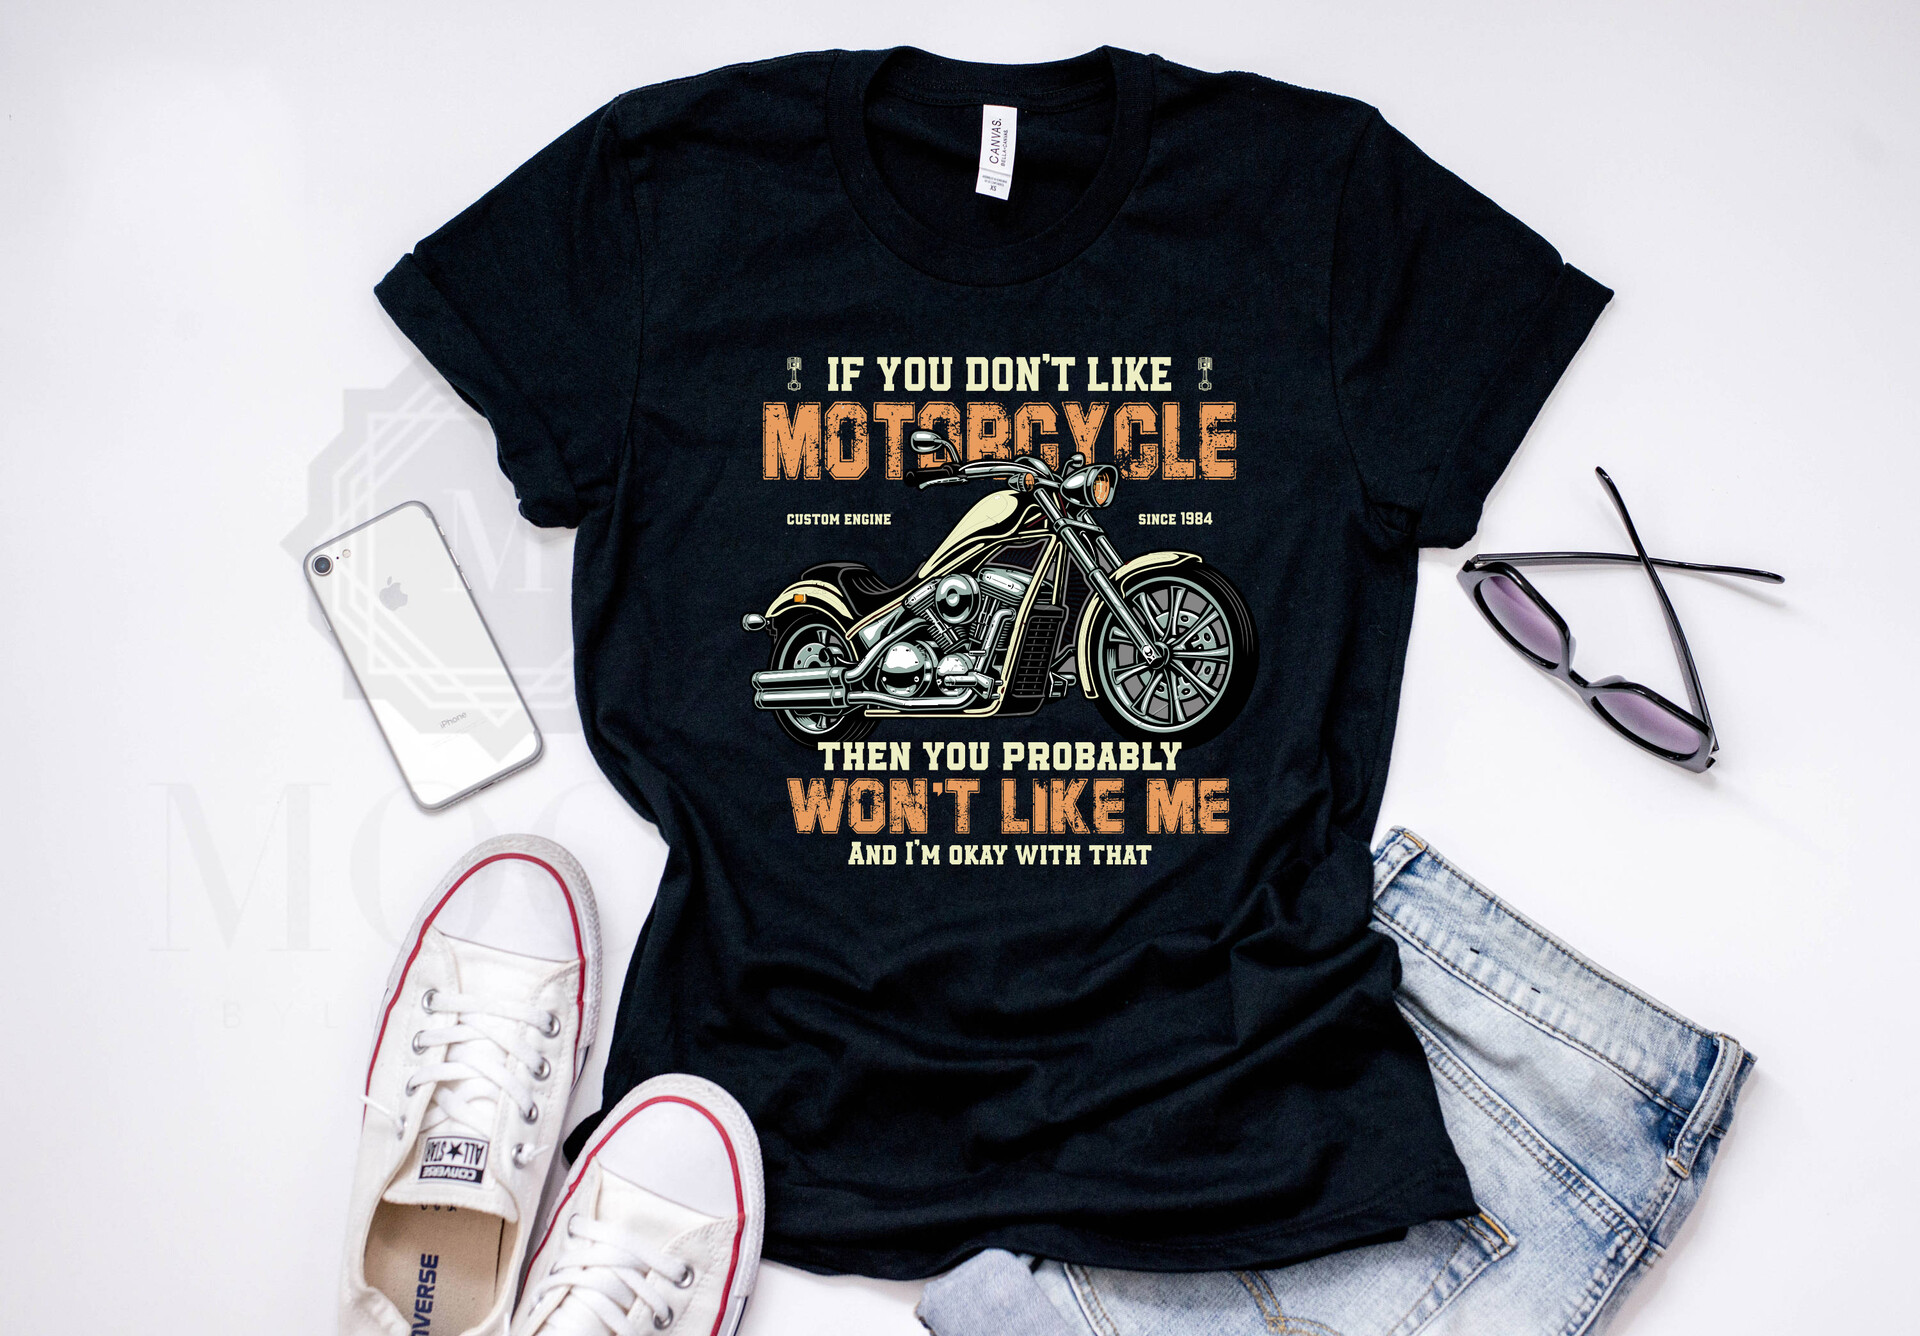 ArtStation - Motorcycle T-shirt Design With Color Variant